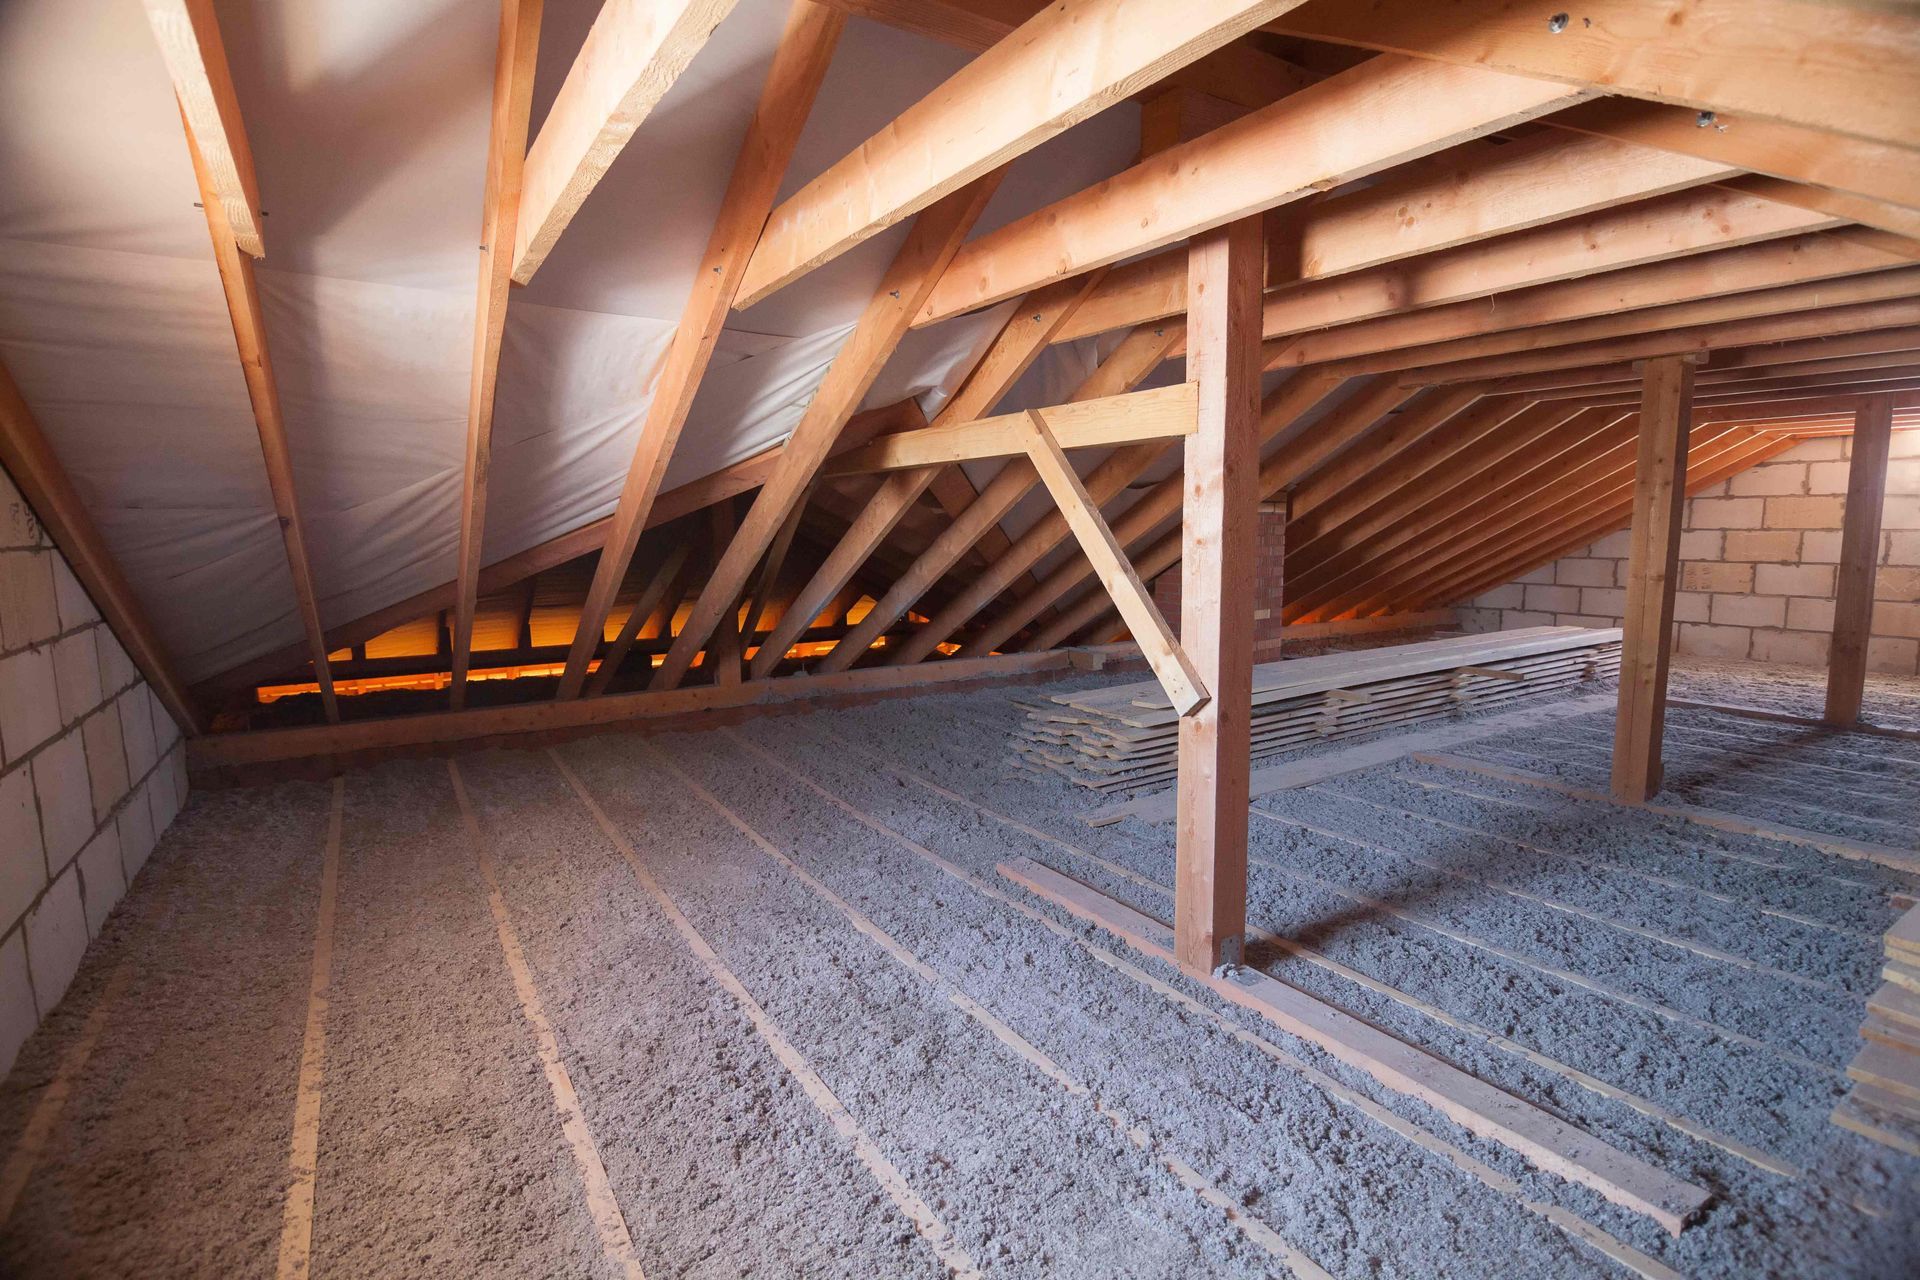 An empty attic with wooden beams and insulation